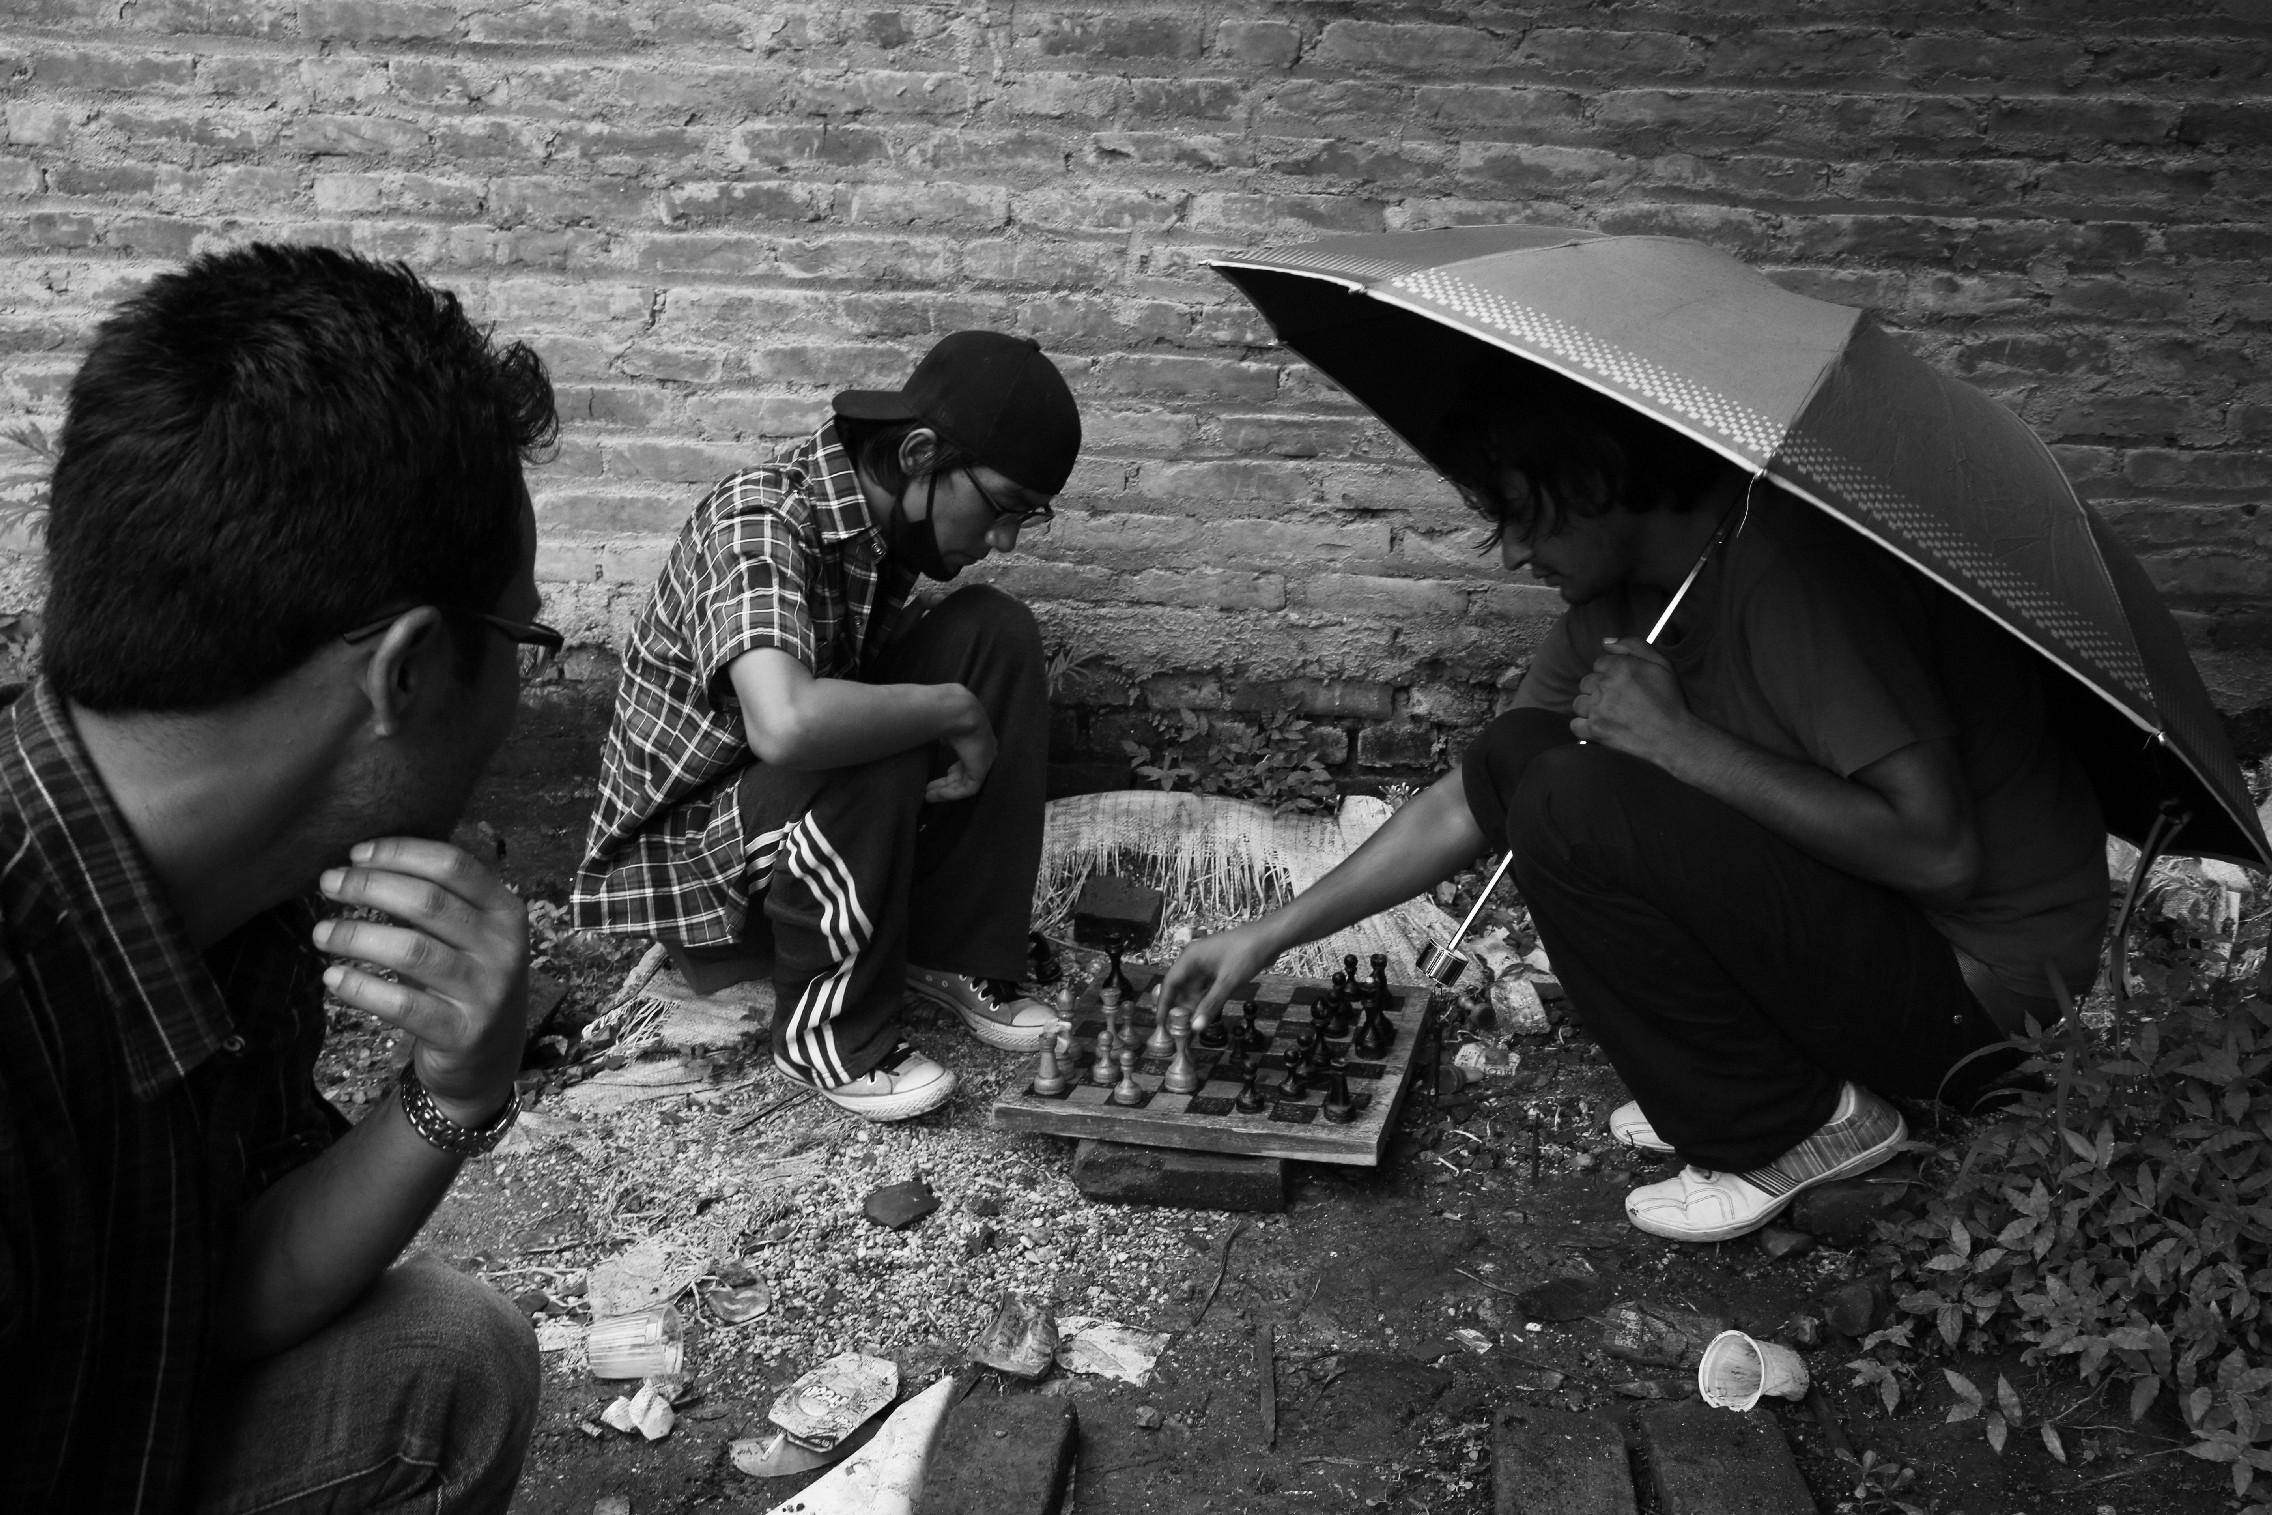 The Vicious circle / The Edge - Drug Addiction in Nepal - 